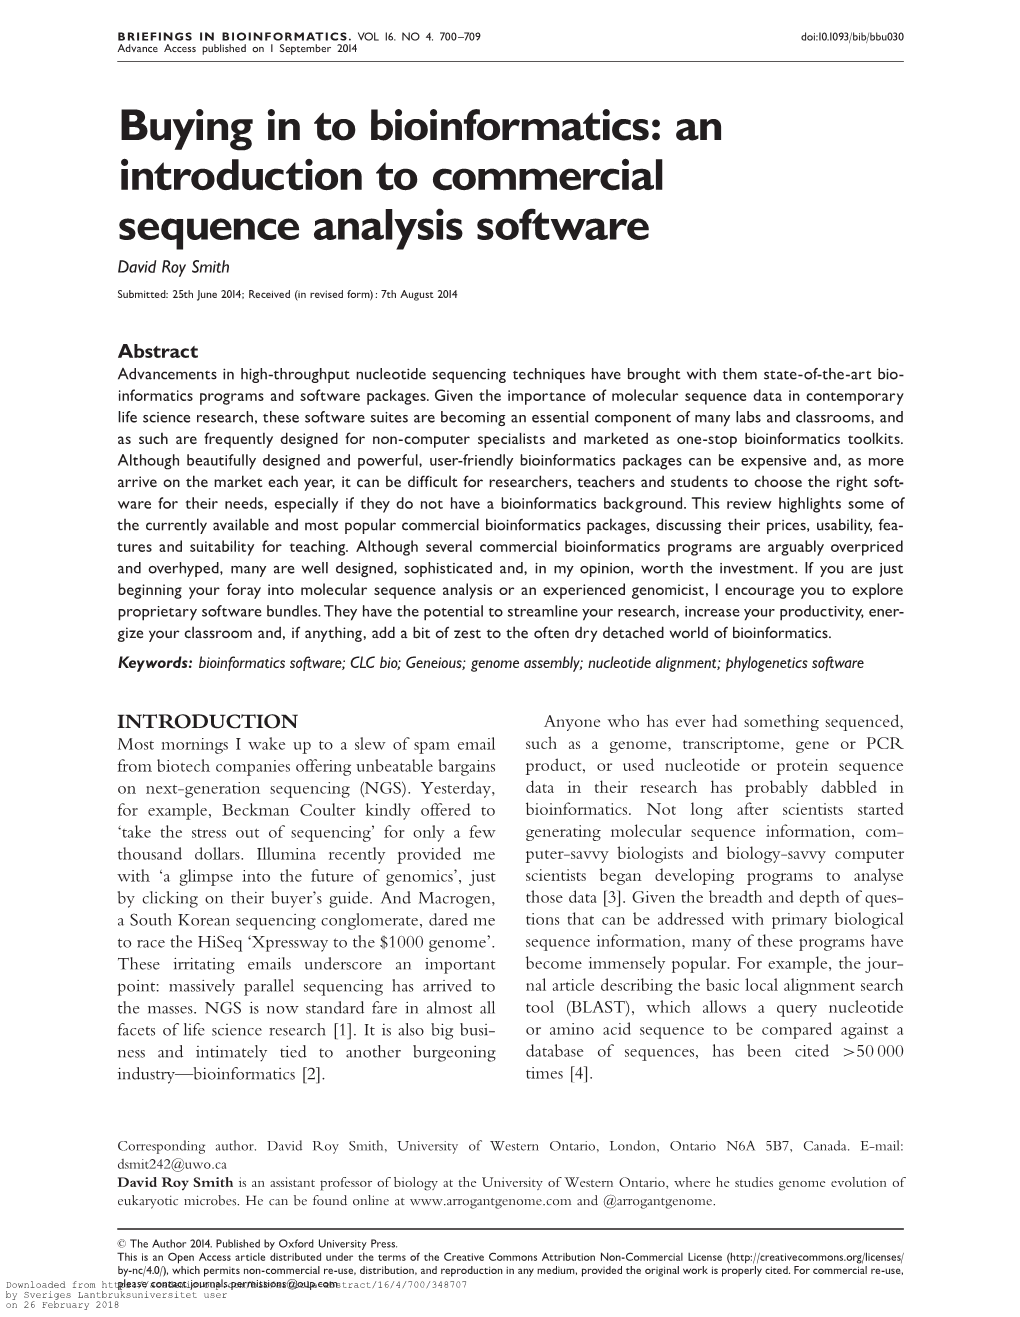 Buying in to Bioinformatics: an Introduction to Commercial Sequence Analysis Software David Roy Smith